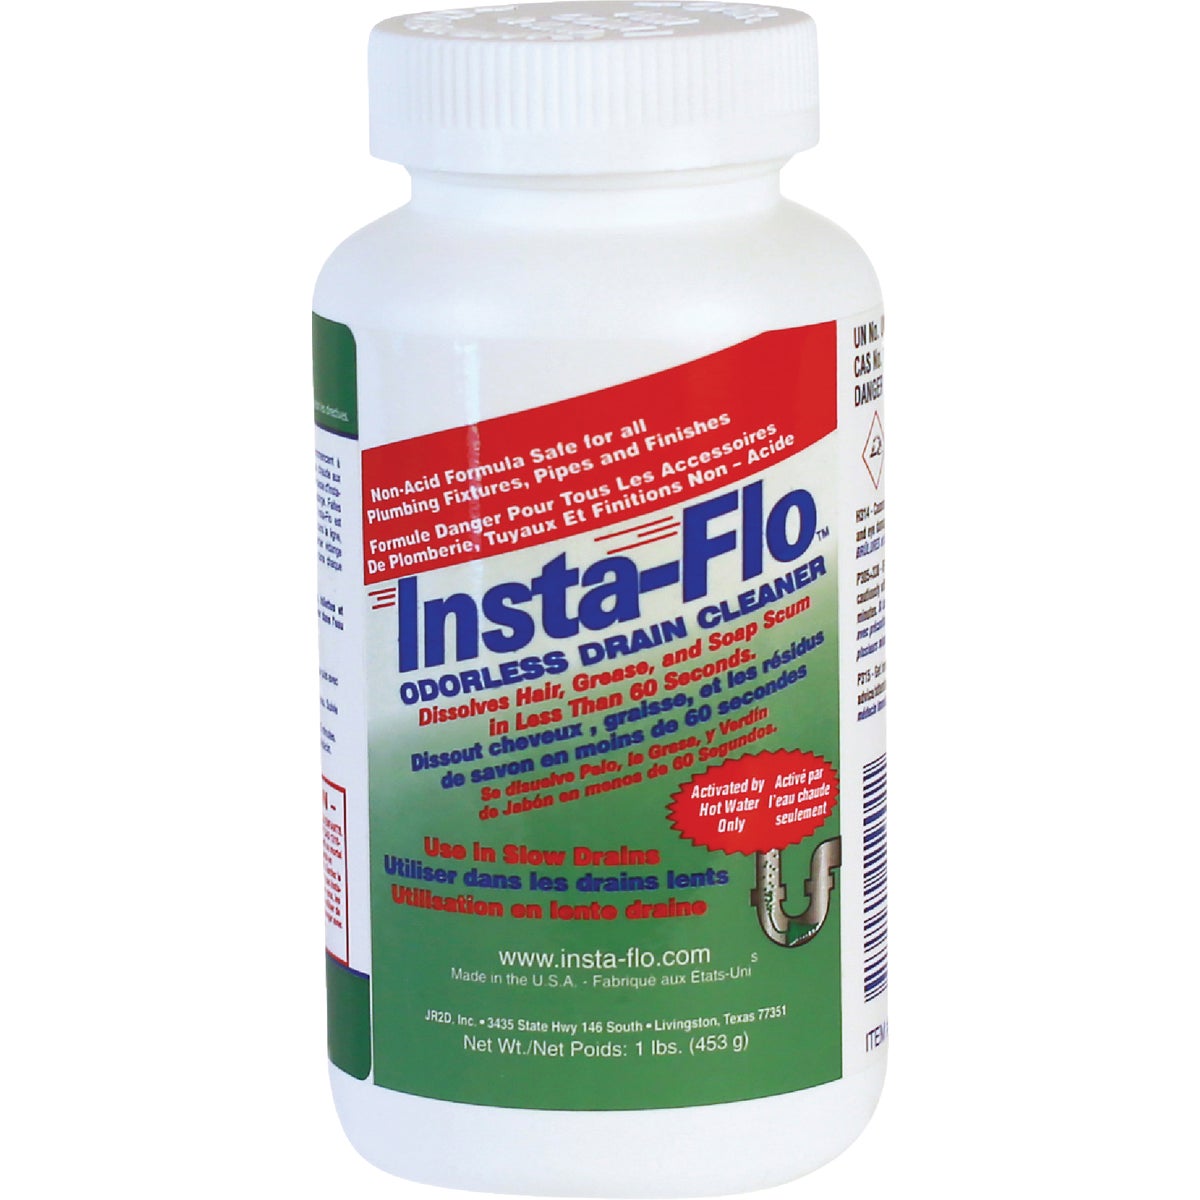 Item 464214, Insta-Flo crystal drain cleaner. Works in 60 seconds.